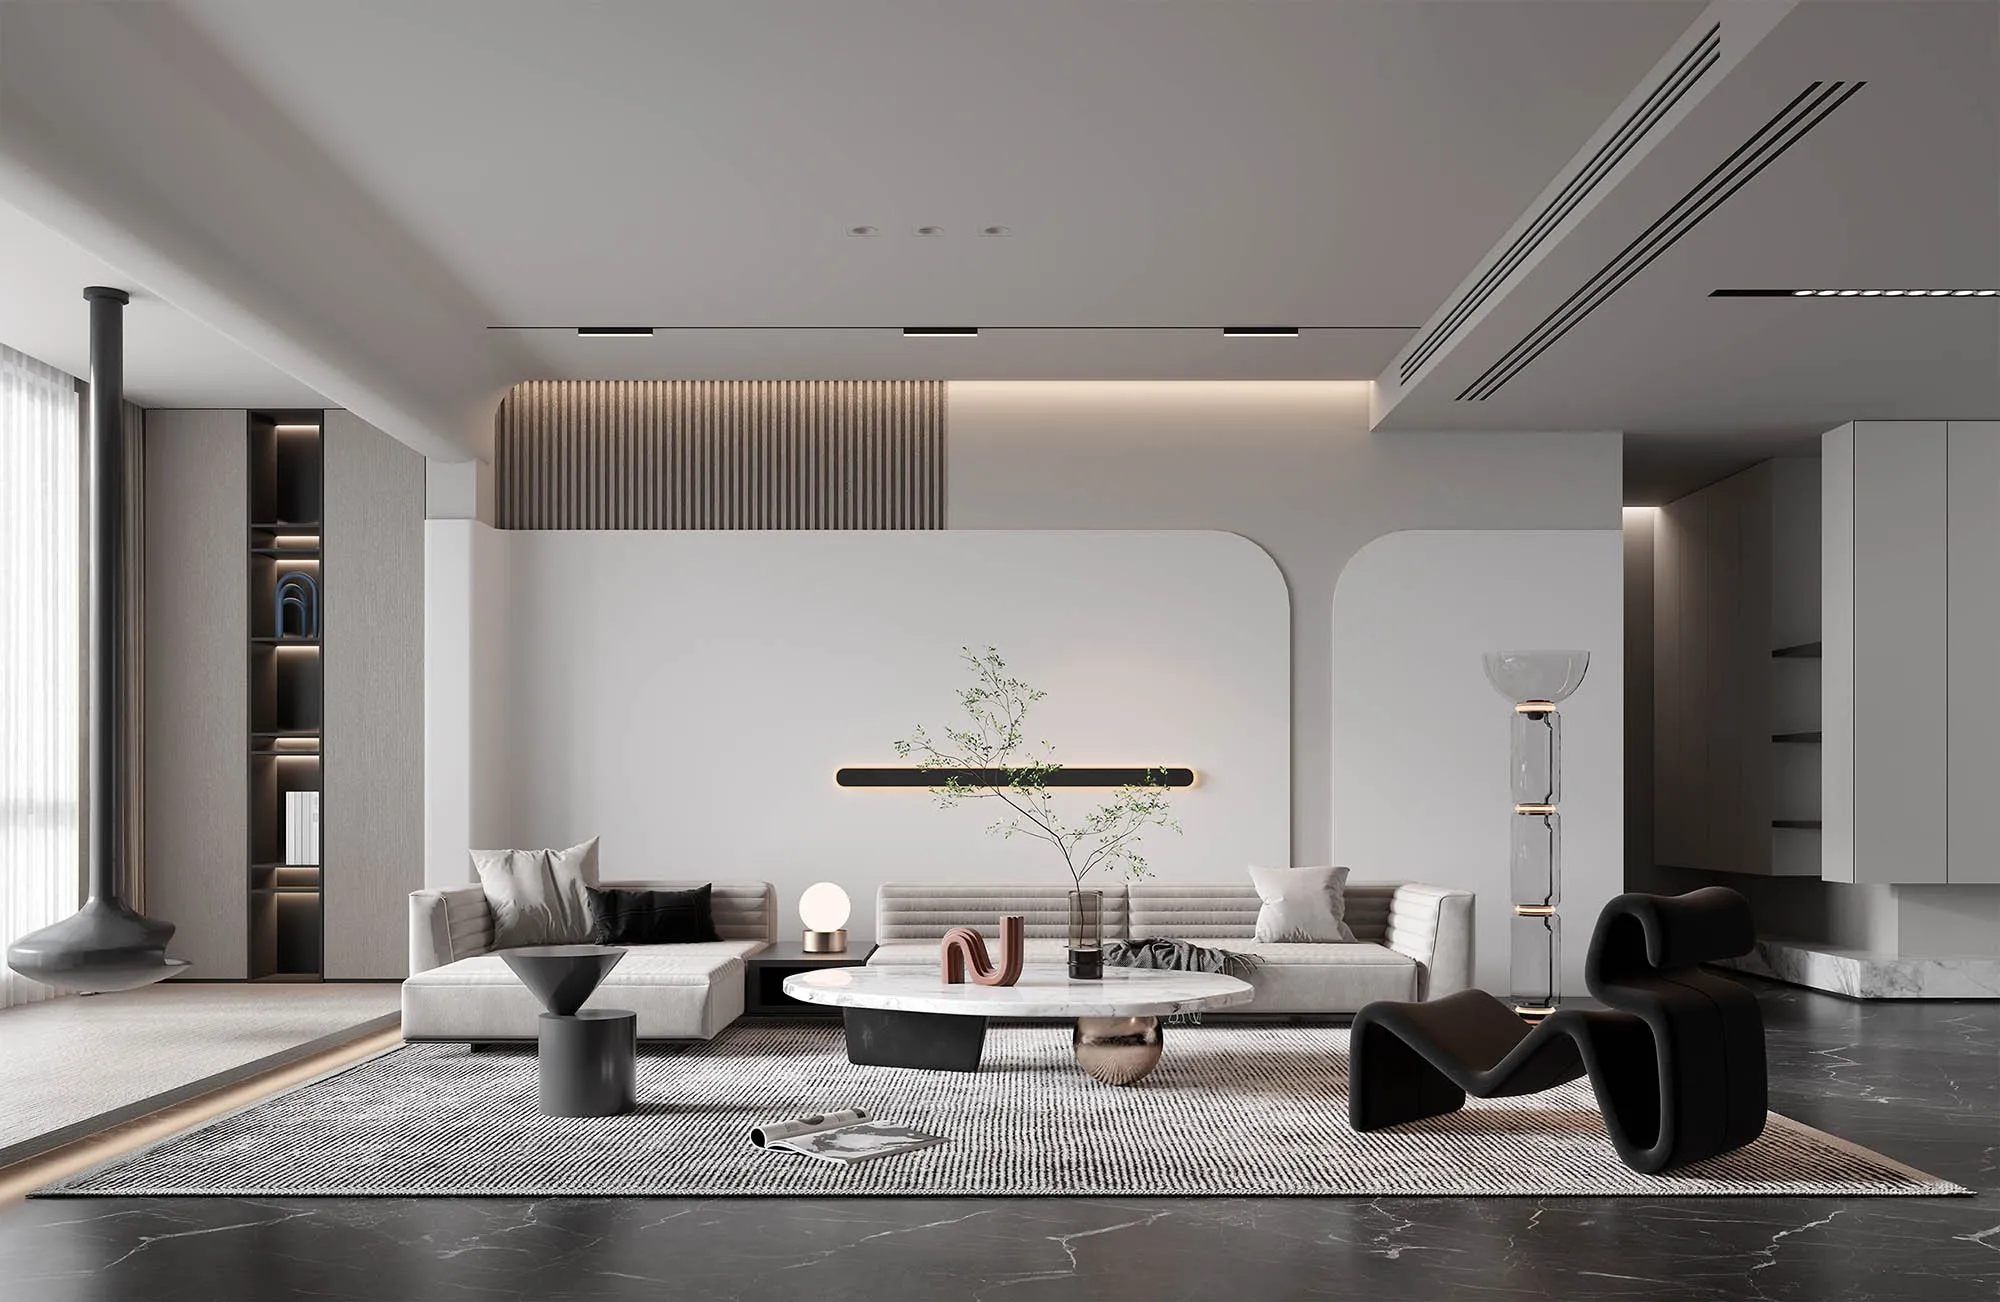 HOUSE SPACE 3D SCENES – LIVING ROOM – 0016